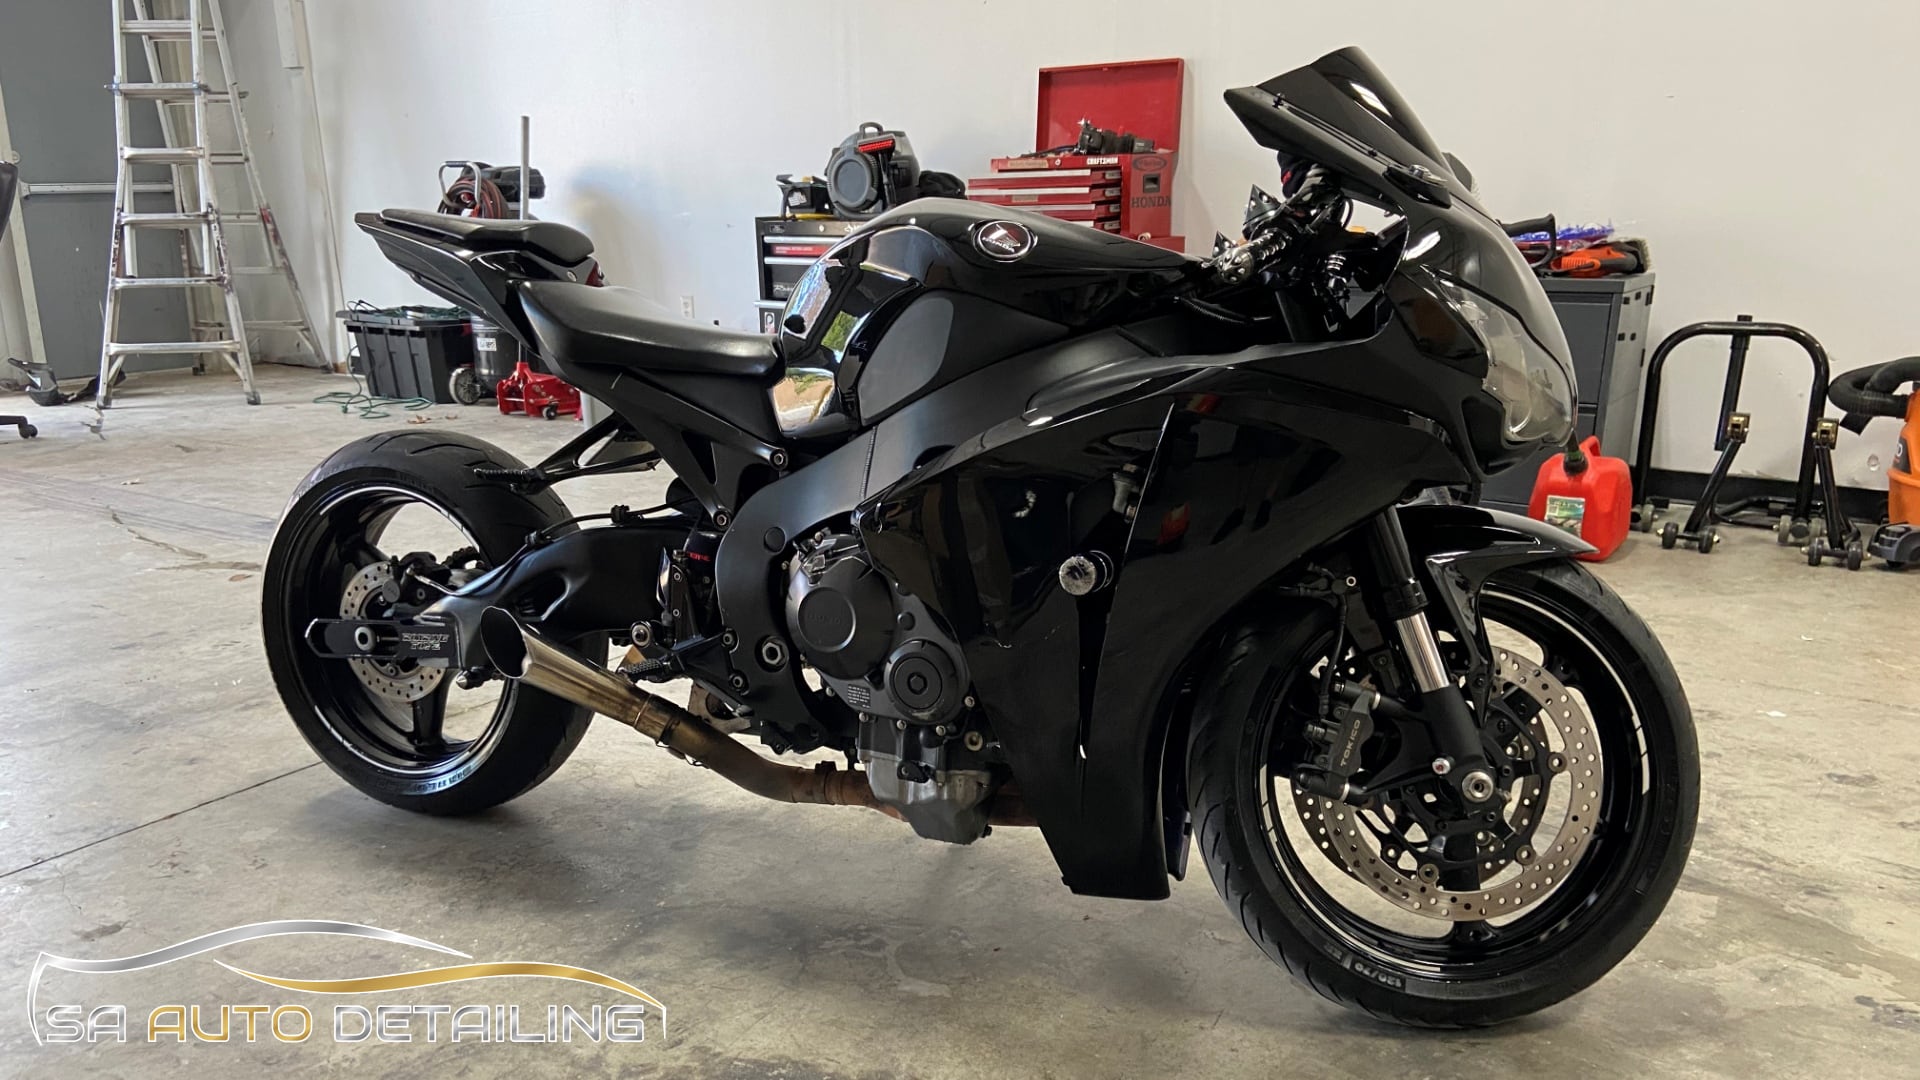 San Antonio Motorcycle Detailing Professional Services & Up-Front Prices